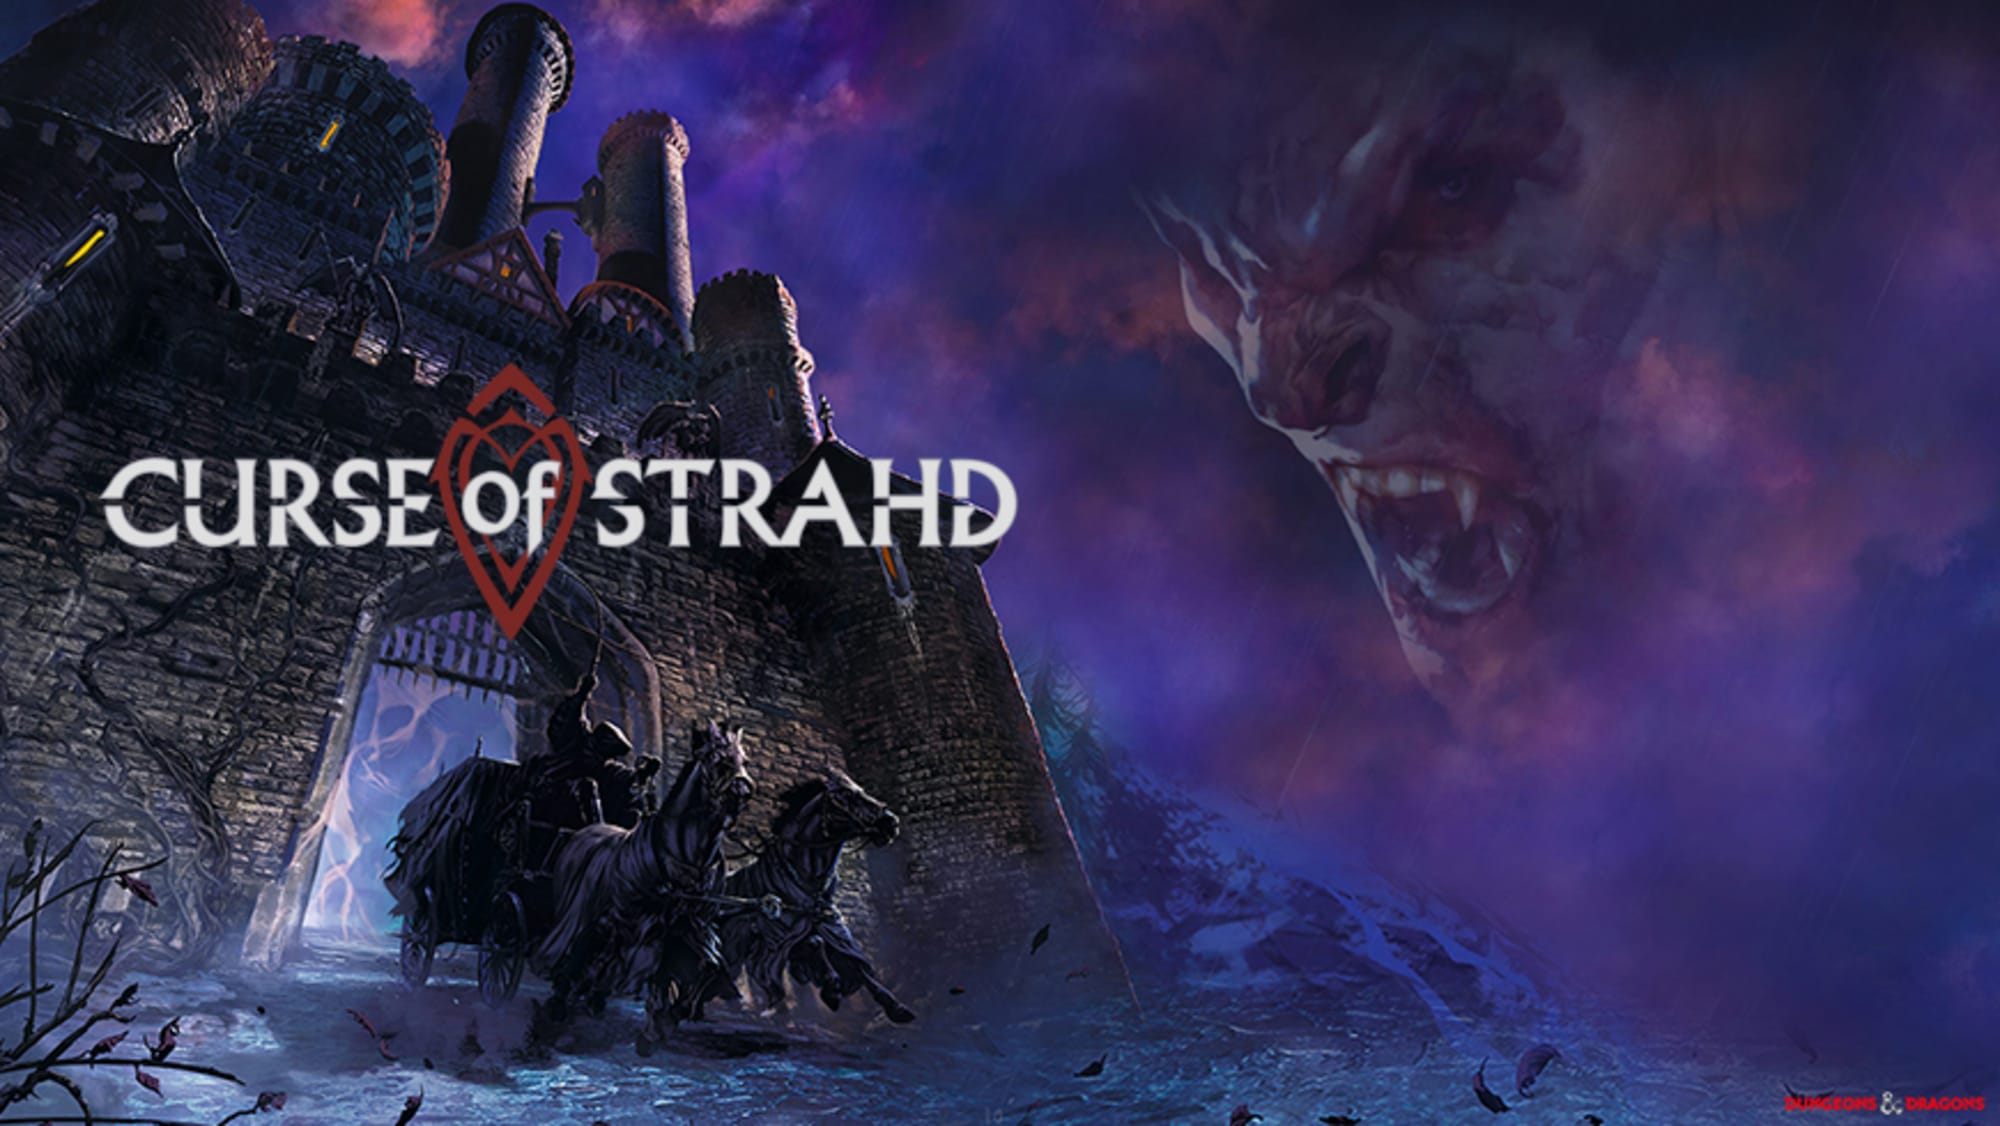 D&D: Relive Curse of Strahd for October.